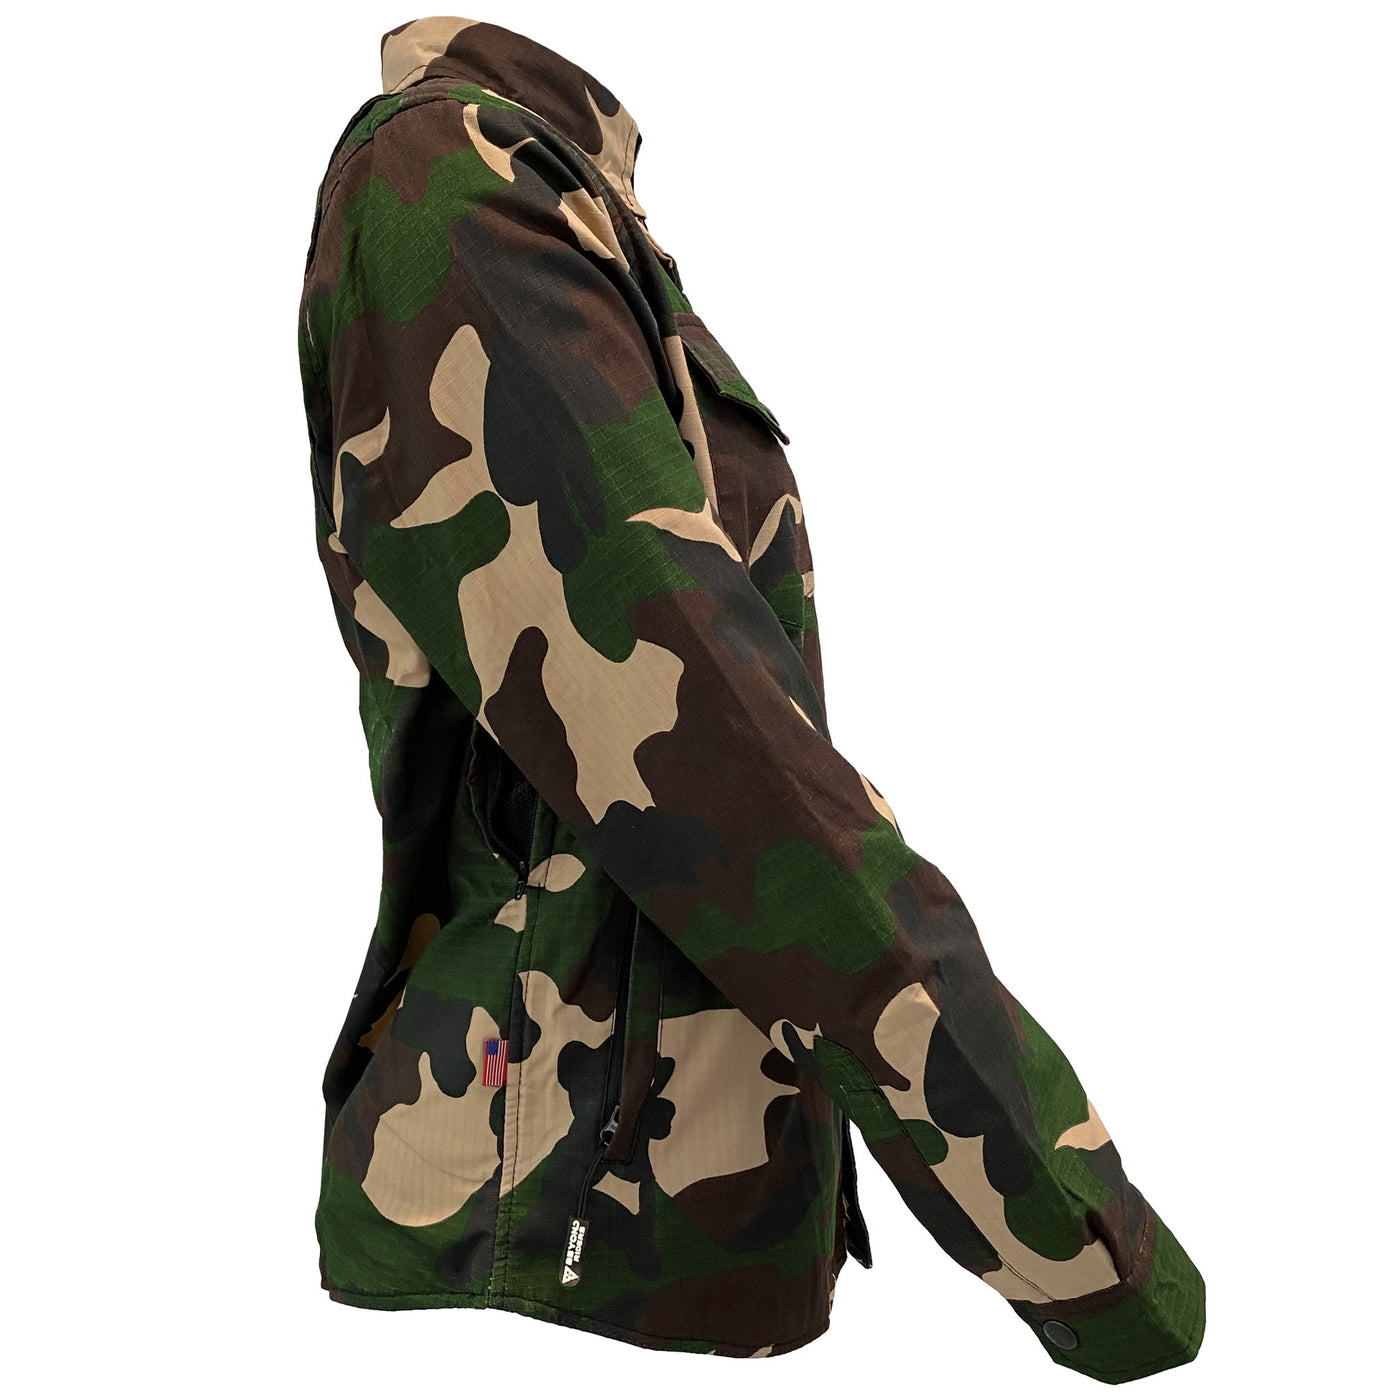 Protective Camouflage Shirt with Pads for Women "Knight Hawk" - Dark Color